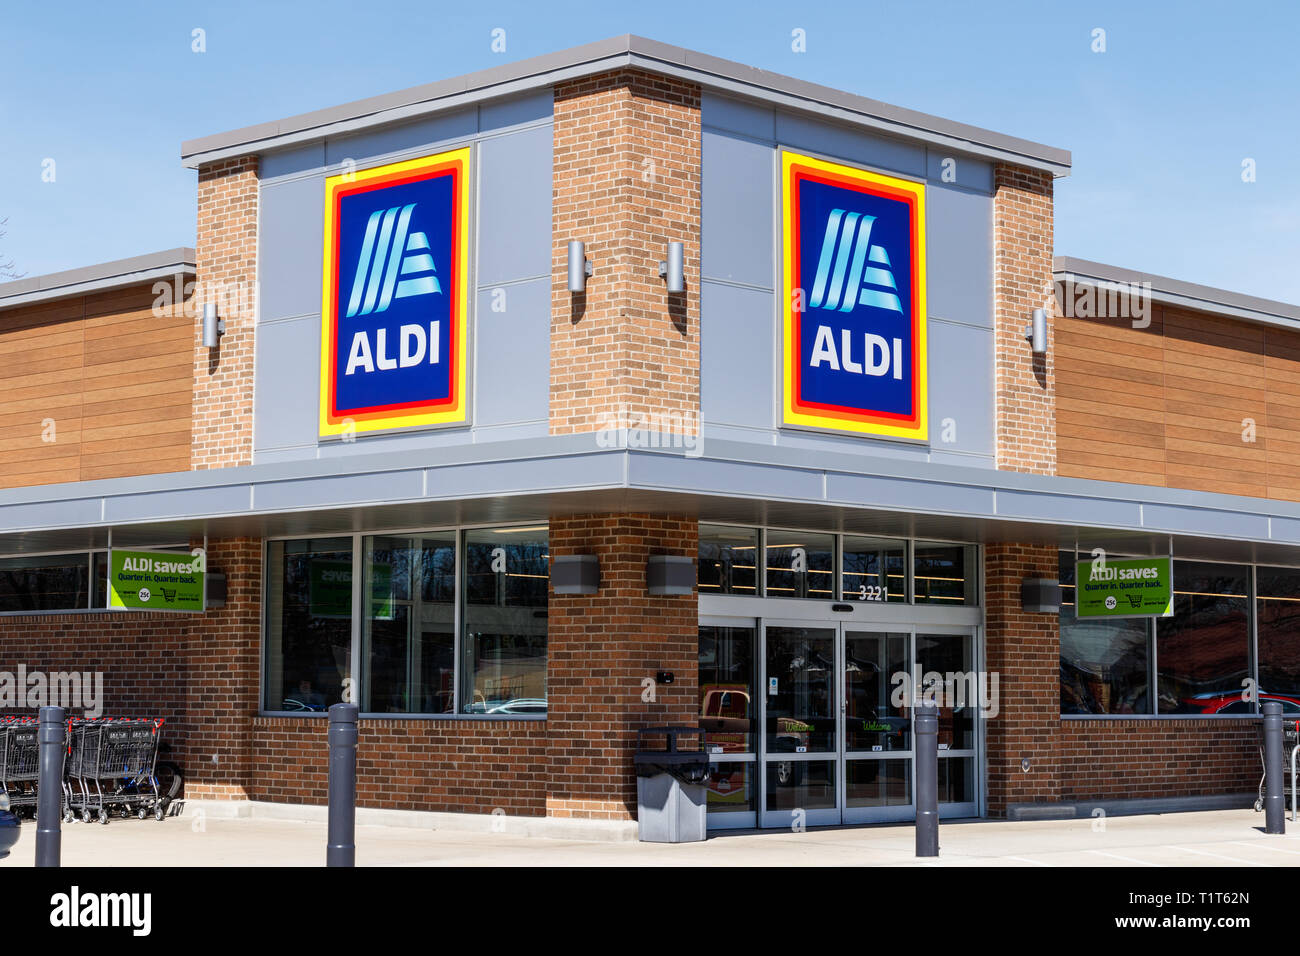 Muncie - Circa March 2019: Aldi Discount Supermarket. Aldi sells a range of grocery items, including produce, meat & dairy, at discount prices II Stock Photo